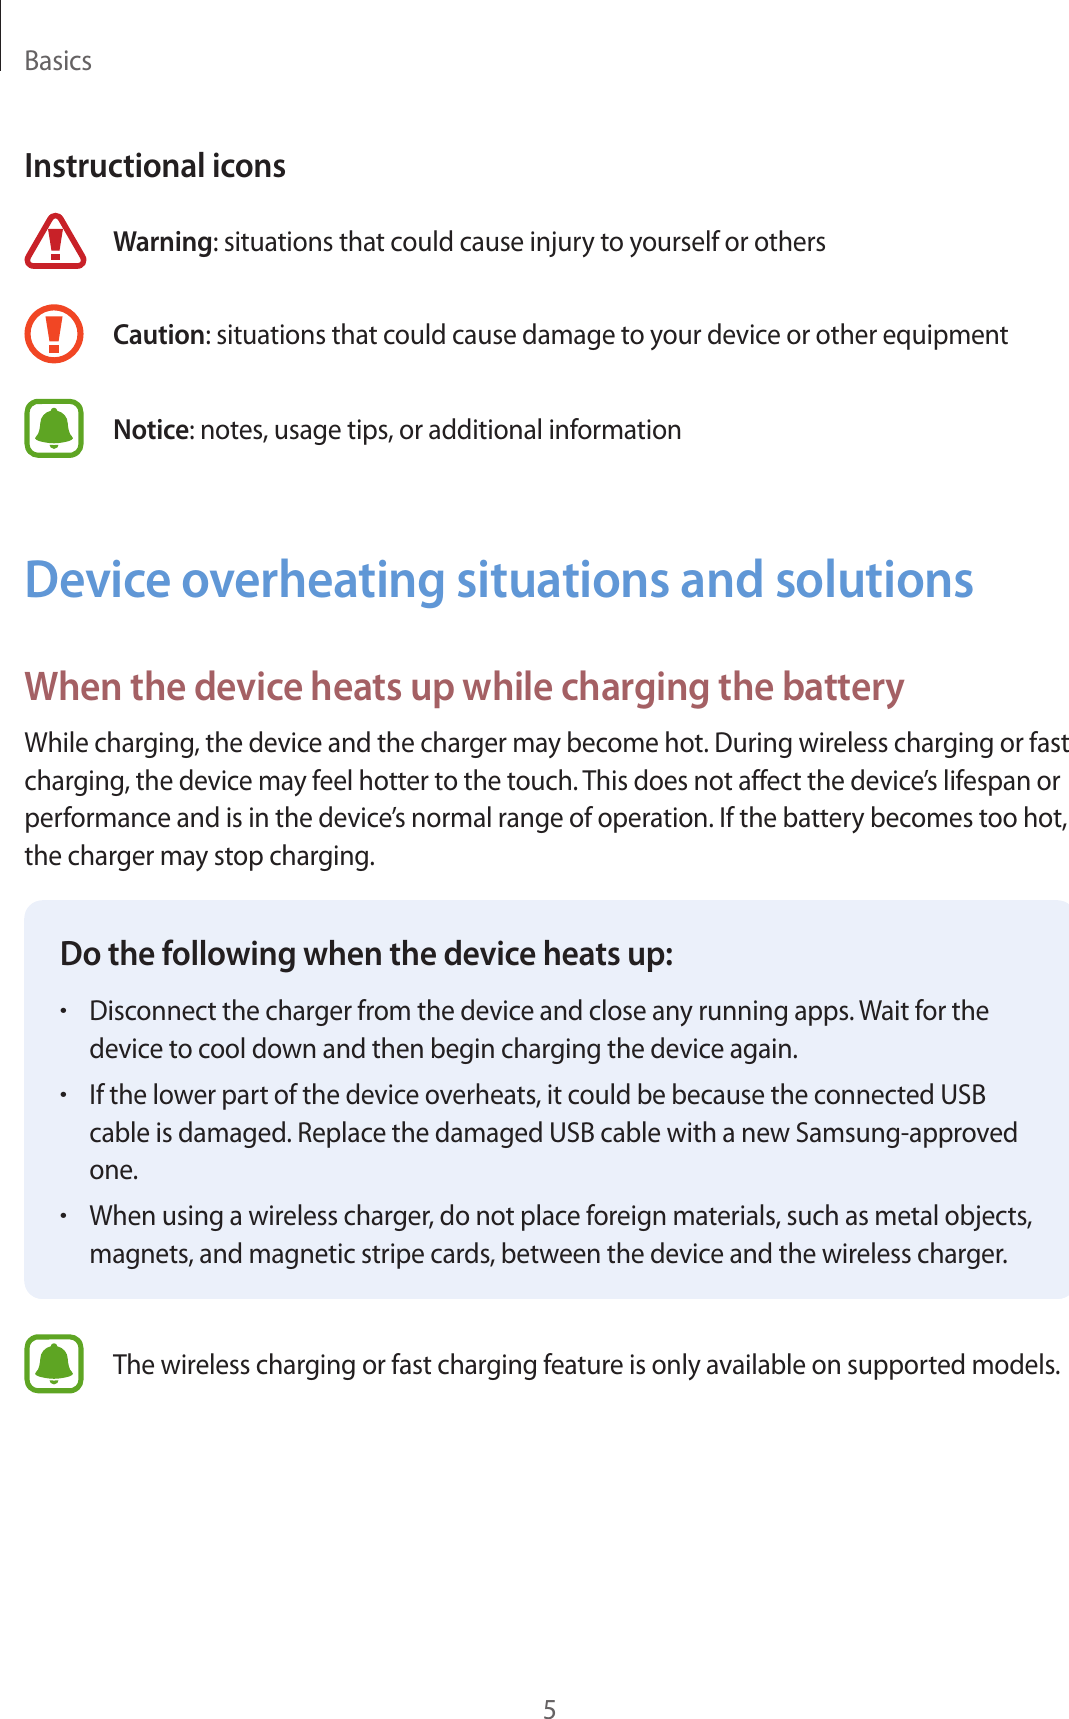 Basics5Instructional iconsWarning: situations that could cause injury to yourself or othersCaution: situations that could cause damage to your device or other equipmentNotice: notes, usage tips, or additional informationDevice overheating situations and solutionsWhen the device heats up while charging the batteryWhile charging, the device and the charger may become hot. During wireless charging or fast charging, the device may feel hotter to the touch. This does not affect the device’s lifespan or performance and is in the device’s normal range of operation. If the battery becomes too hot, the charger may stop charging.Do the following when the device heats up:•Disconnect the charger from the device and close any running apps. Wait for the device to cool down and then begin charging the device again.•If the lower part of the device overheats, it could be because the connected USB cable is damaged. Replace the damaged USB cable with a new Samsung-approved one.•When using a wireless charger, do not place foreign materials, such as metal objects, magnets, and magnetic stripe cards, between the device and the wireless charger.The wireless charging or fast charging feature is only available on supported models.